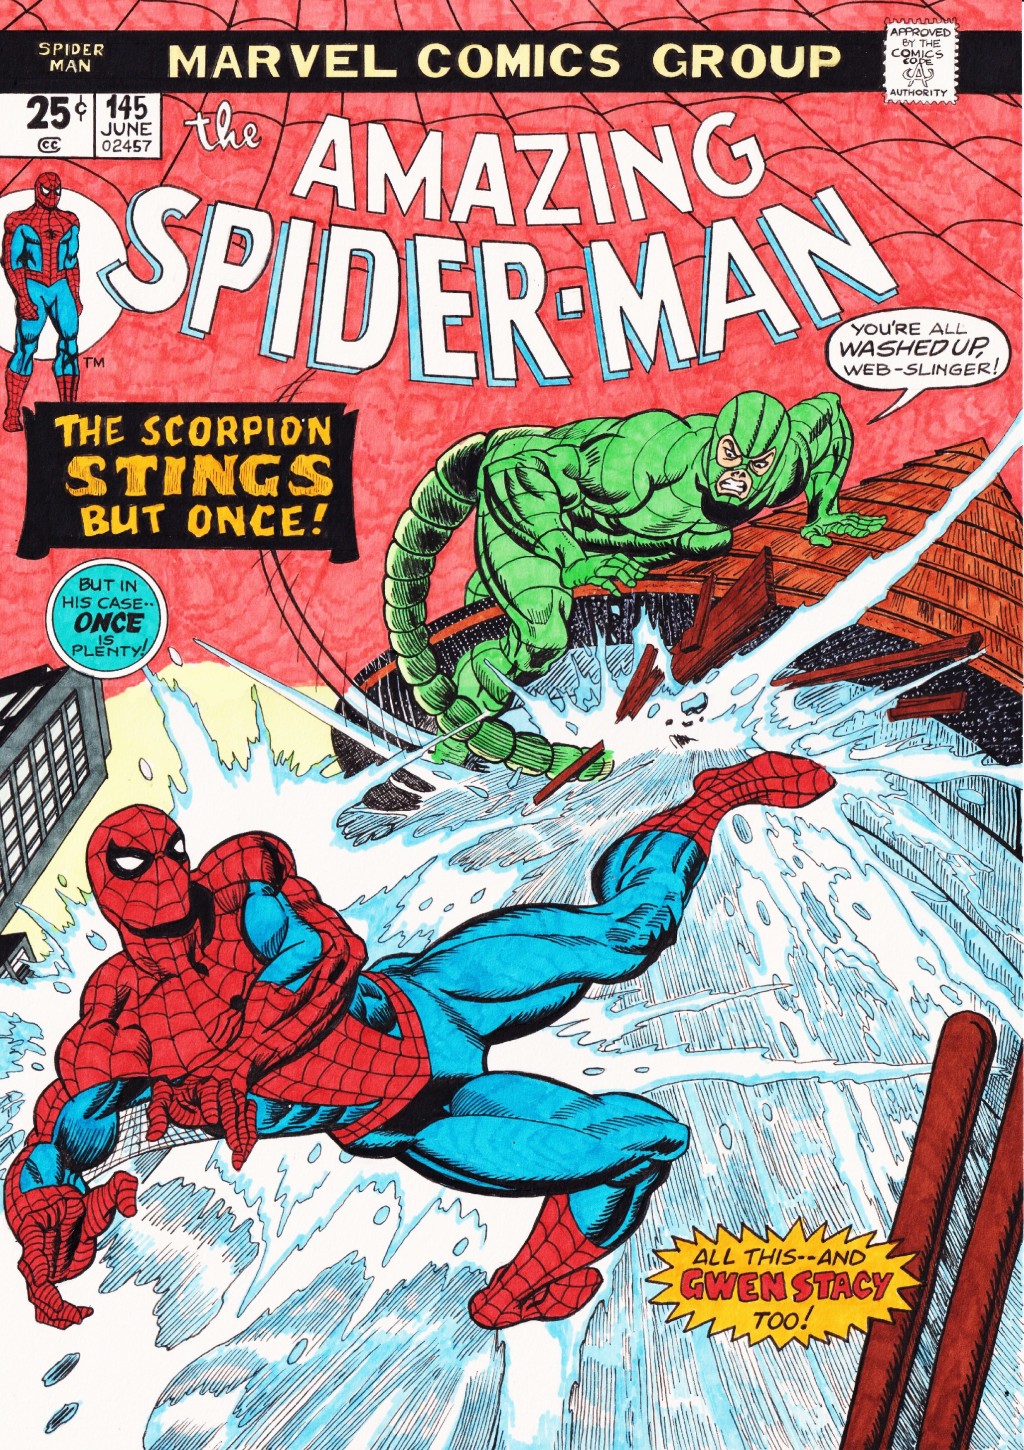 The Amazing Spiderman: The Scorpion stings but once!